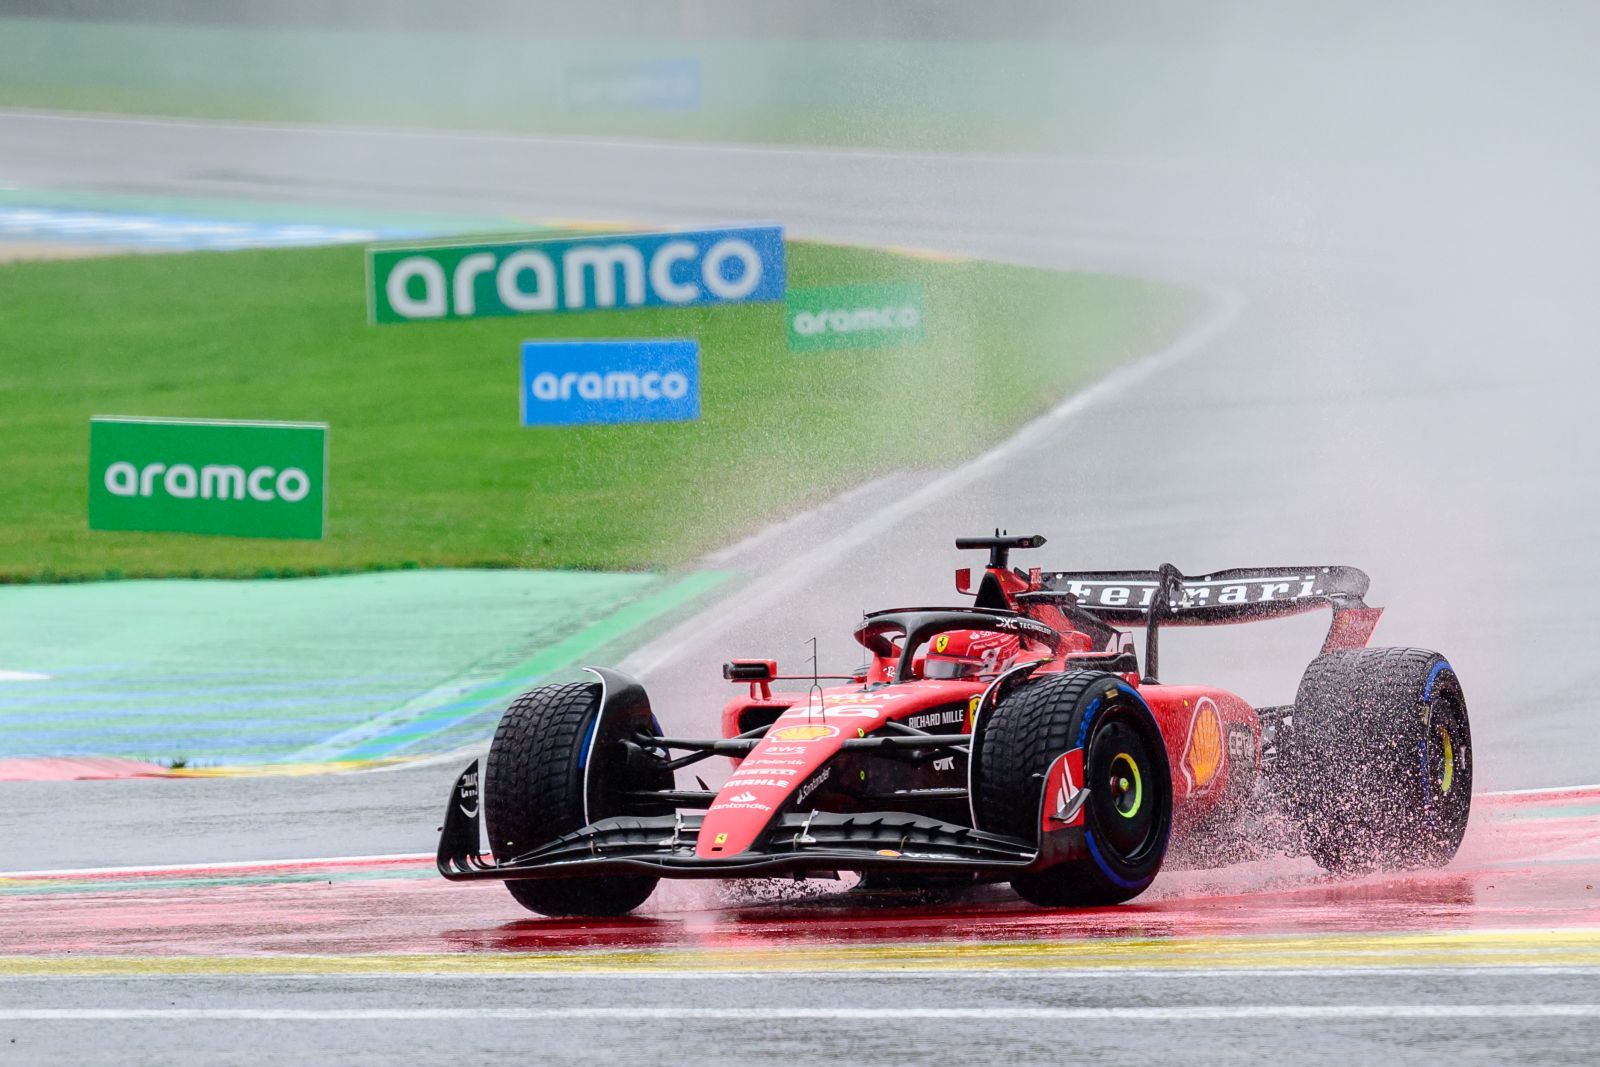 epa10773797 Monaco's Formula One driver Charles Leclerc of Scuderia Ferrari slips off the track during the Practice session for the 2023 Formula 1 Belgian Grand Prix at the Circuit de Spa-Francorchamps racetrack in Stavelot, Belgium, 28 July 2023. The 2023 Formula 1 Belgian Grand Prix takes place on 30 July.  EPA/CHRISTIAN BRUNA